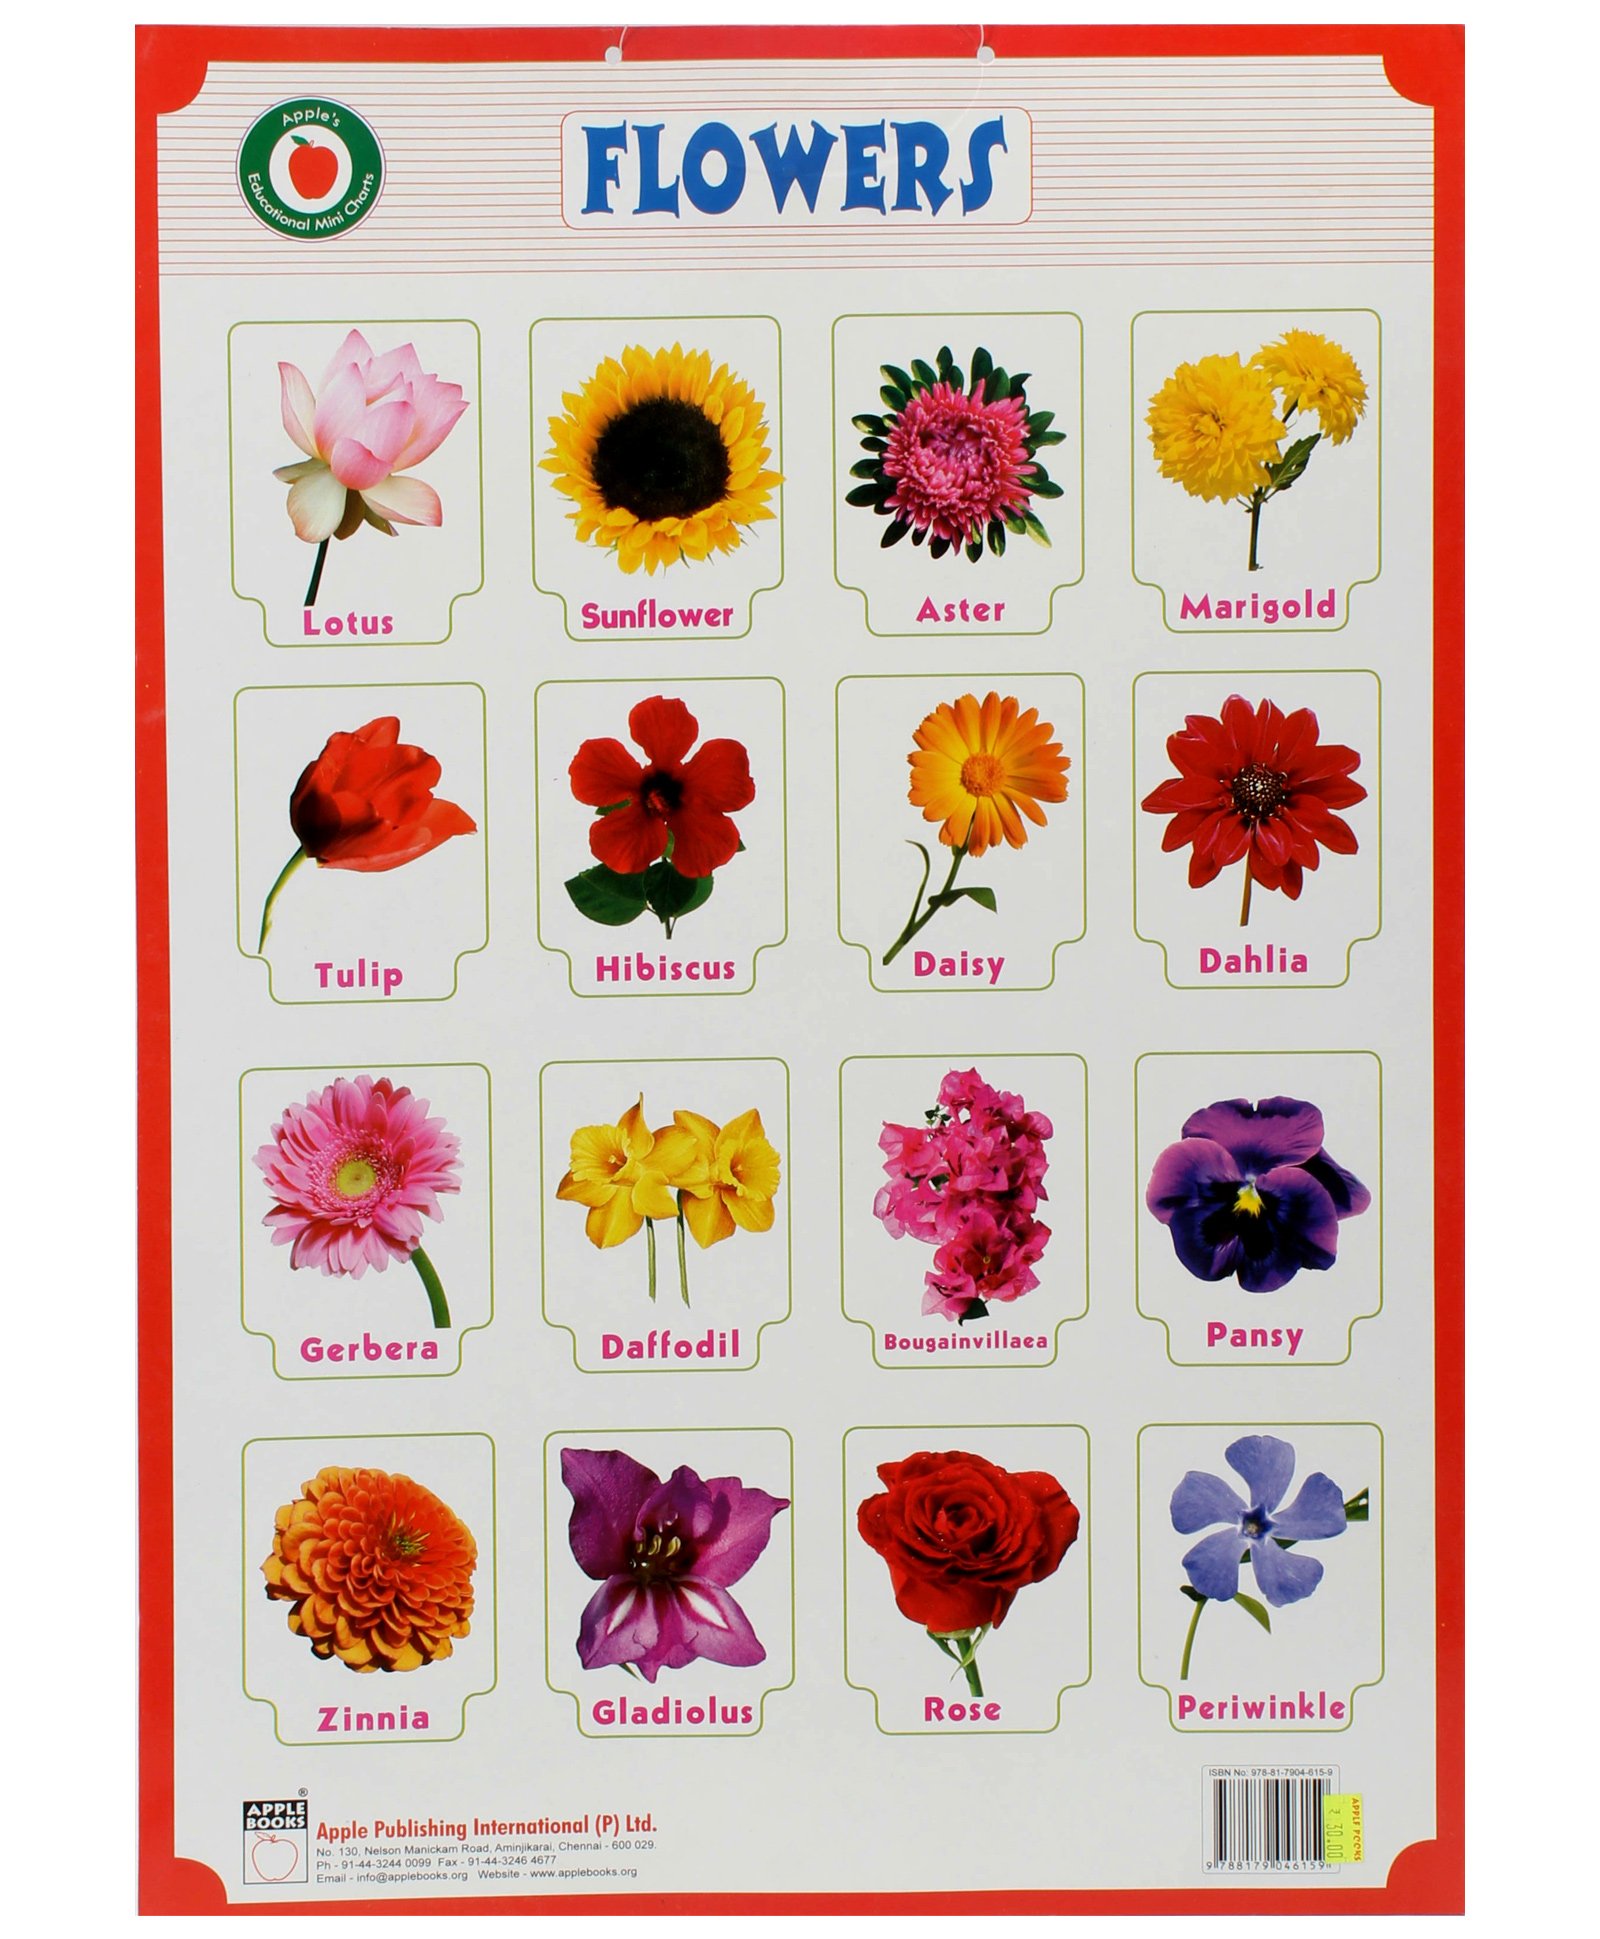 Flowers Name In Sanskrit With Pictures | Best Flower Site